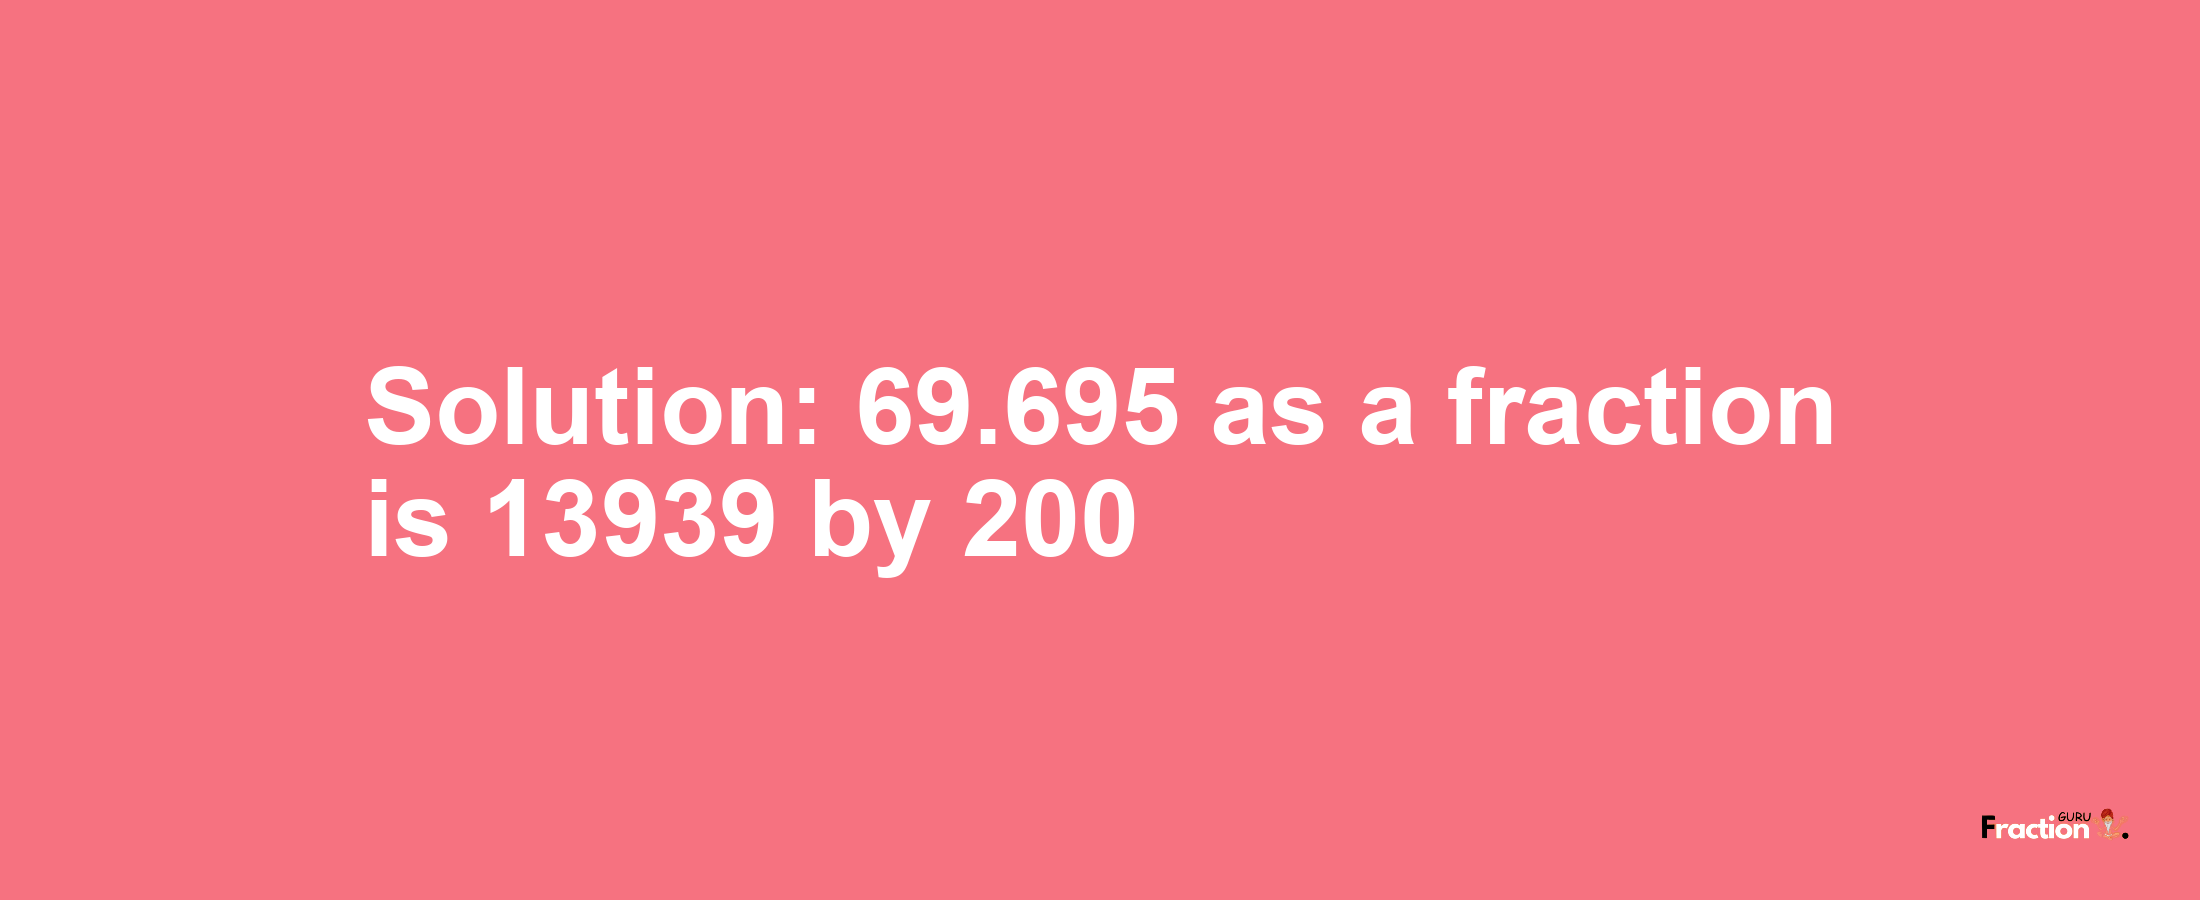 Solution:69.695 as a fraction is 13939/200